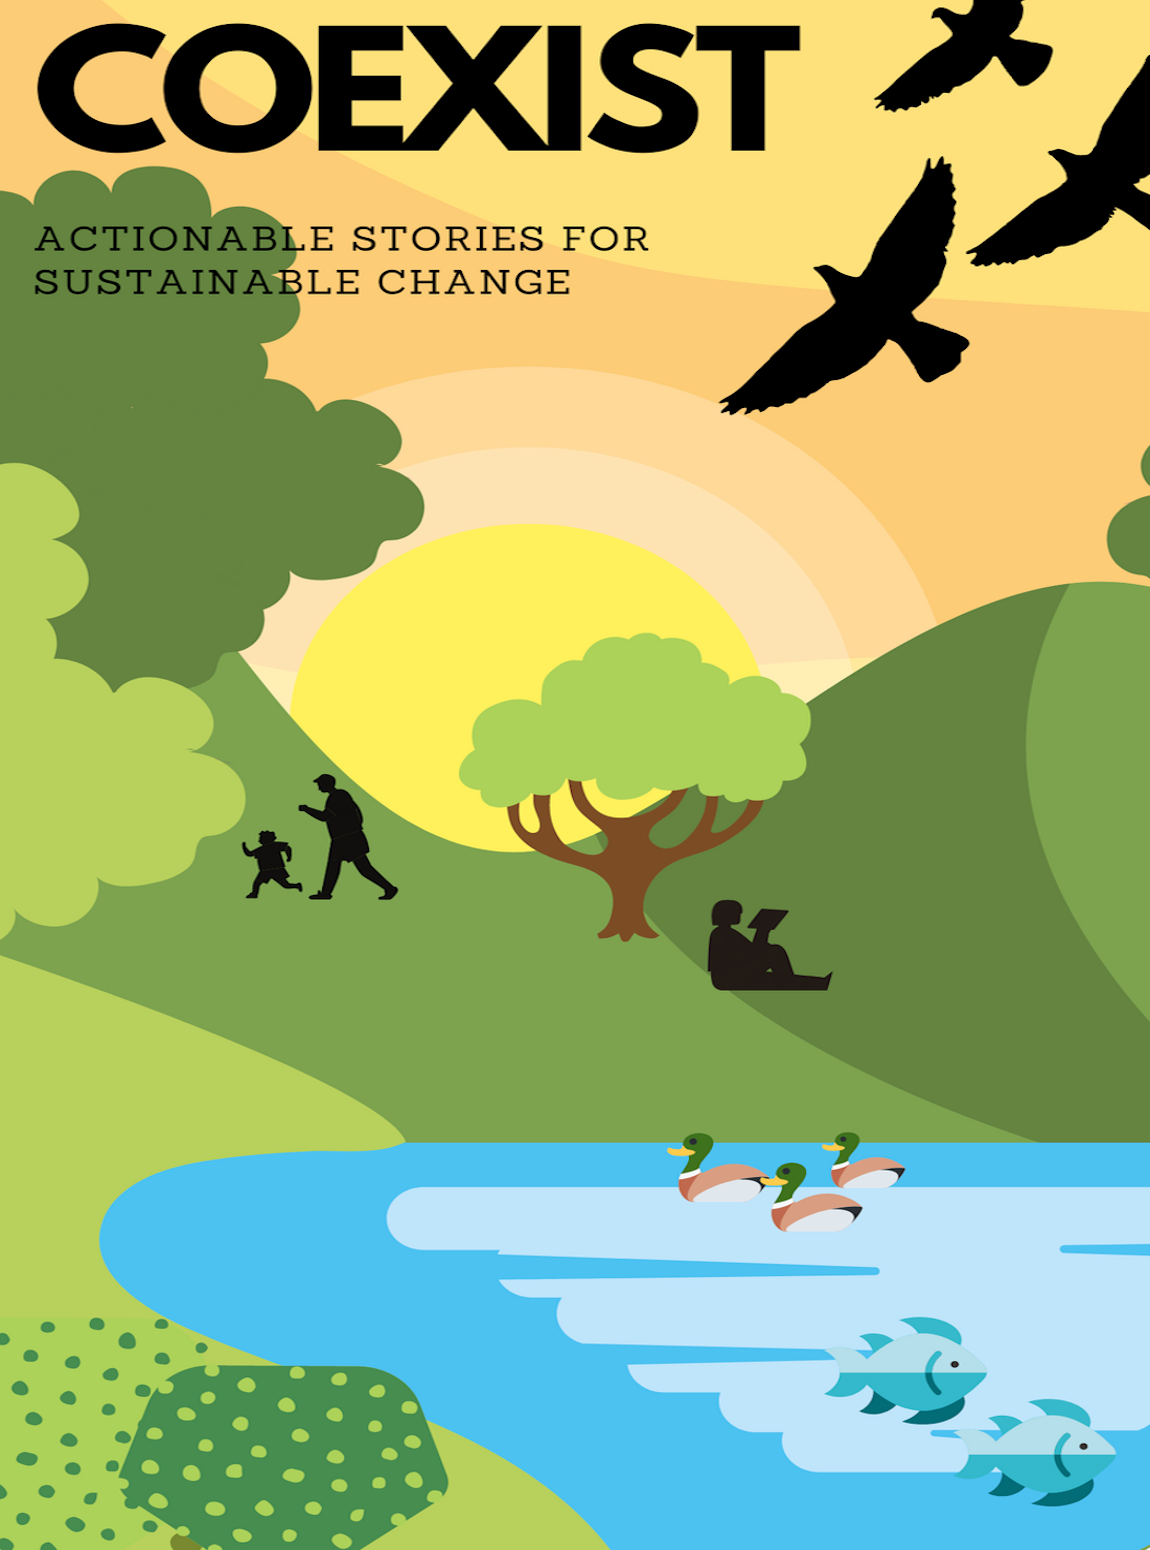 COEXIST - Actionable Stories for Sustainable Change